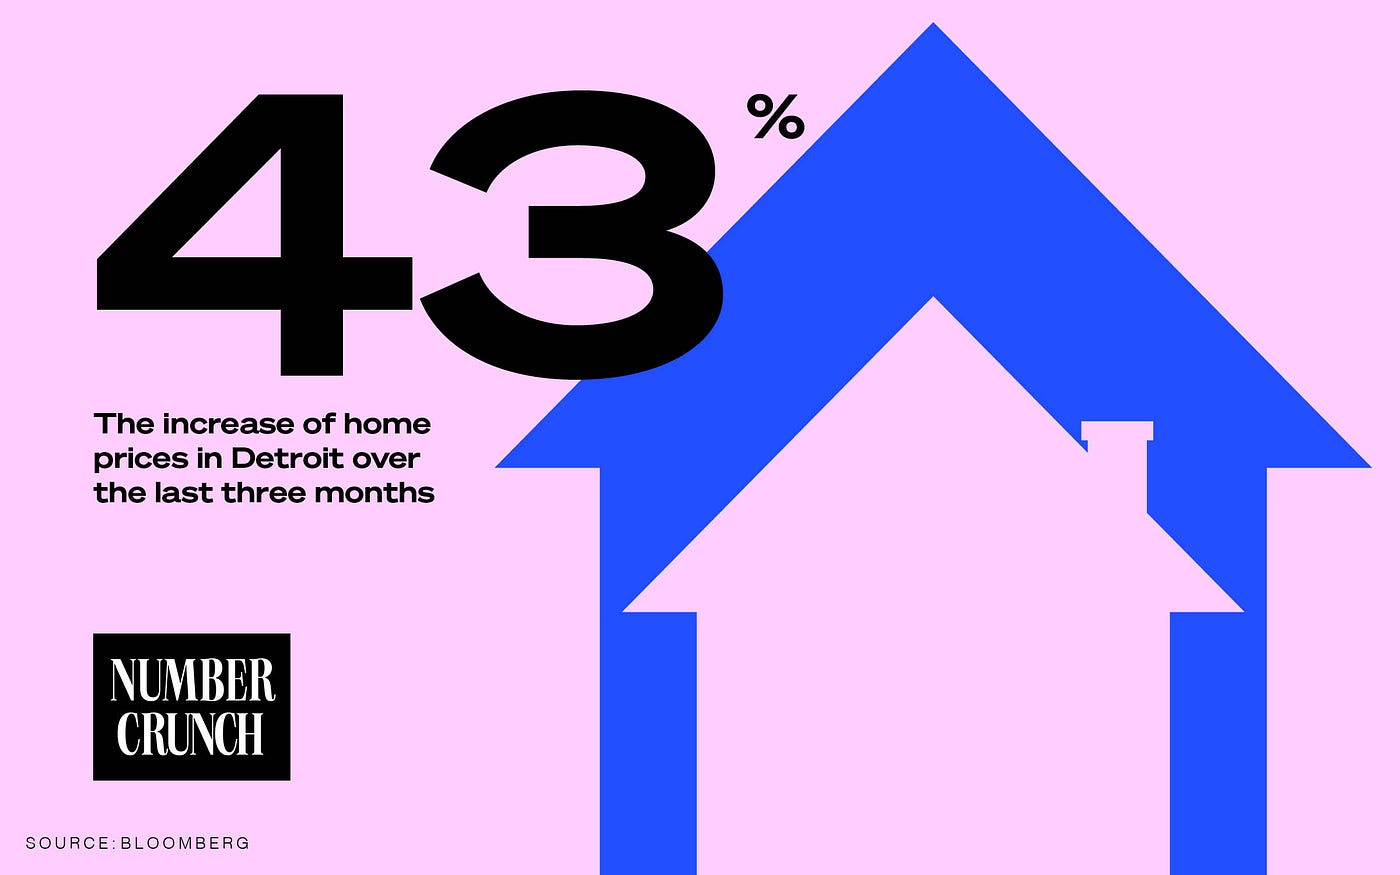 A Number Crunch logo alongside the text “43% The increase in home prices in Detroit over the past three months. Source: Bloomberg Businessweek” next to an illustration of two houses on a pink background.